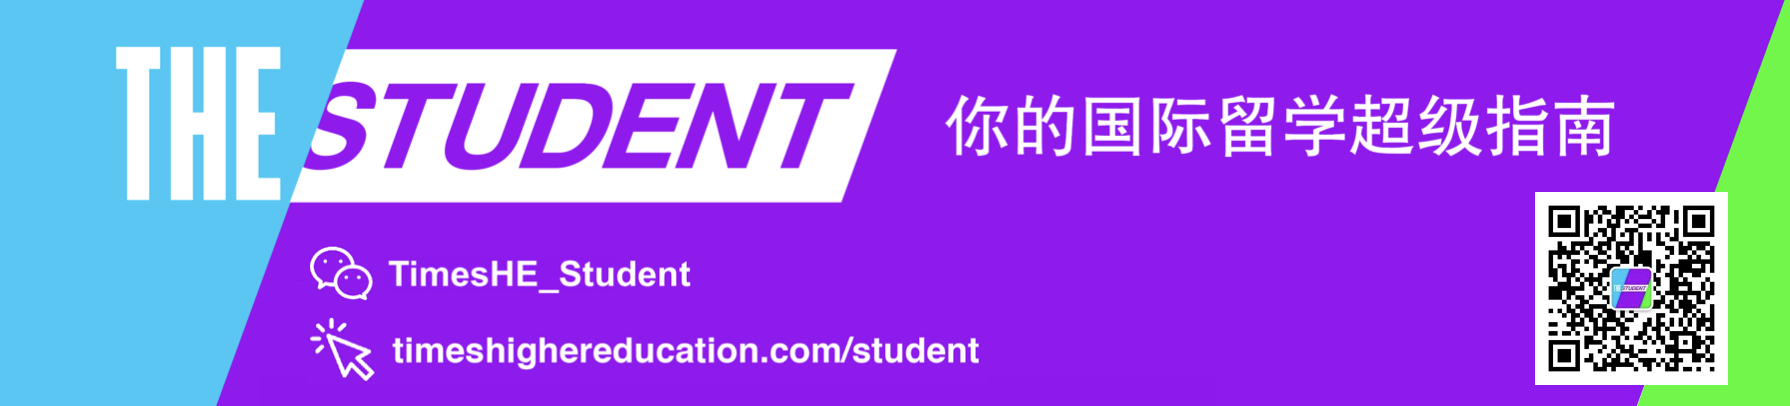 THE WeChat ID: TimesHE_Student